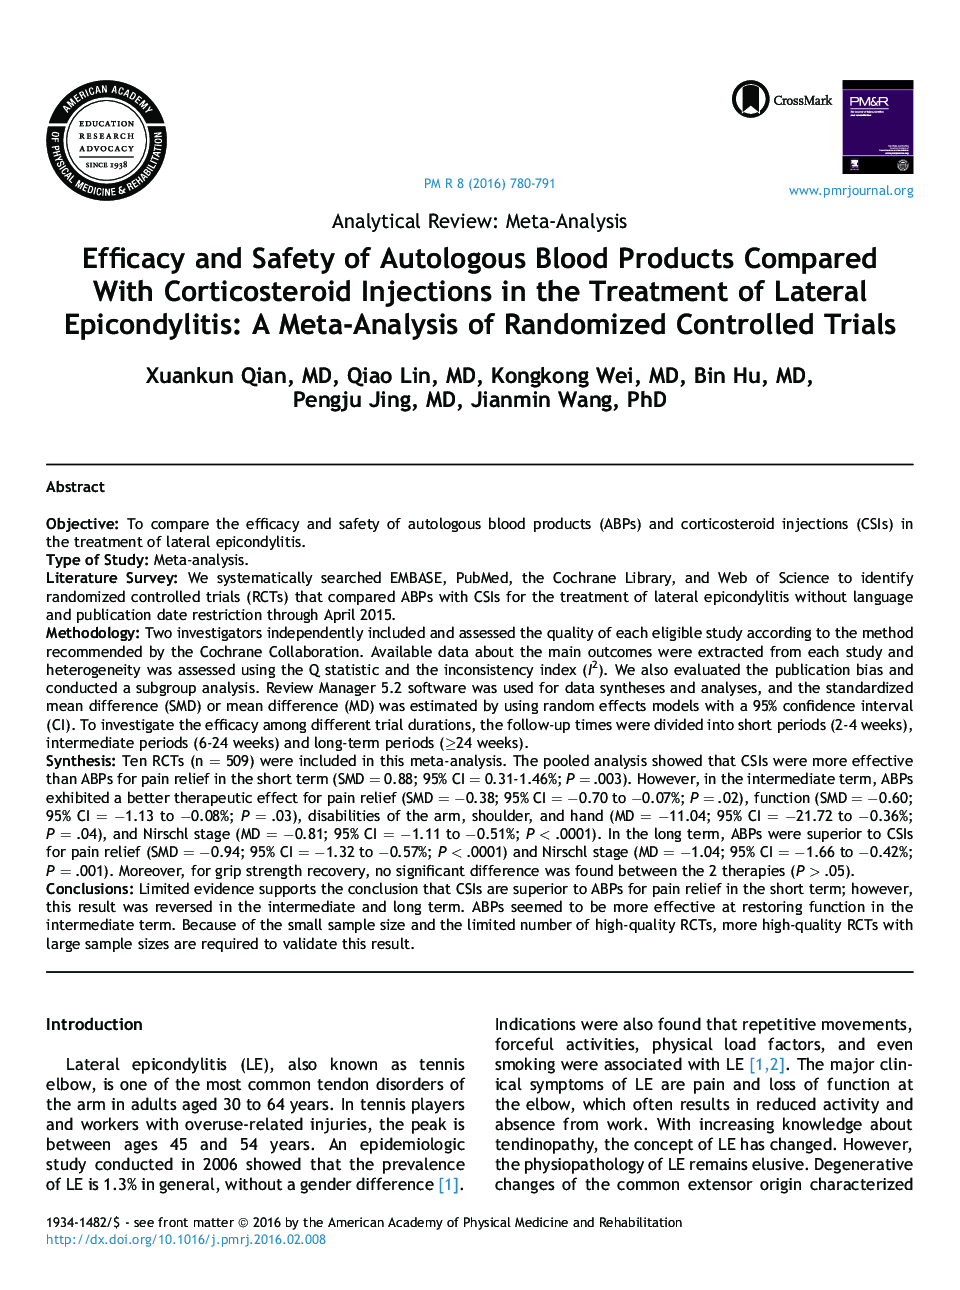 Efficacy and Safety of Autologous Blood Products Compared With Corticosteroid Injections in the Treatment of Lateral Epicondylitis: A Meta-Analysis of Randomized Controlled Trials